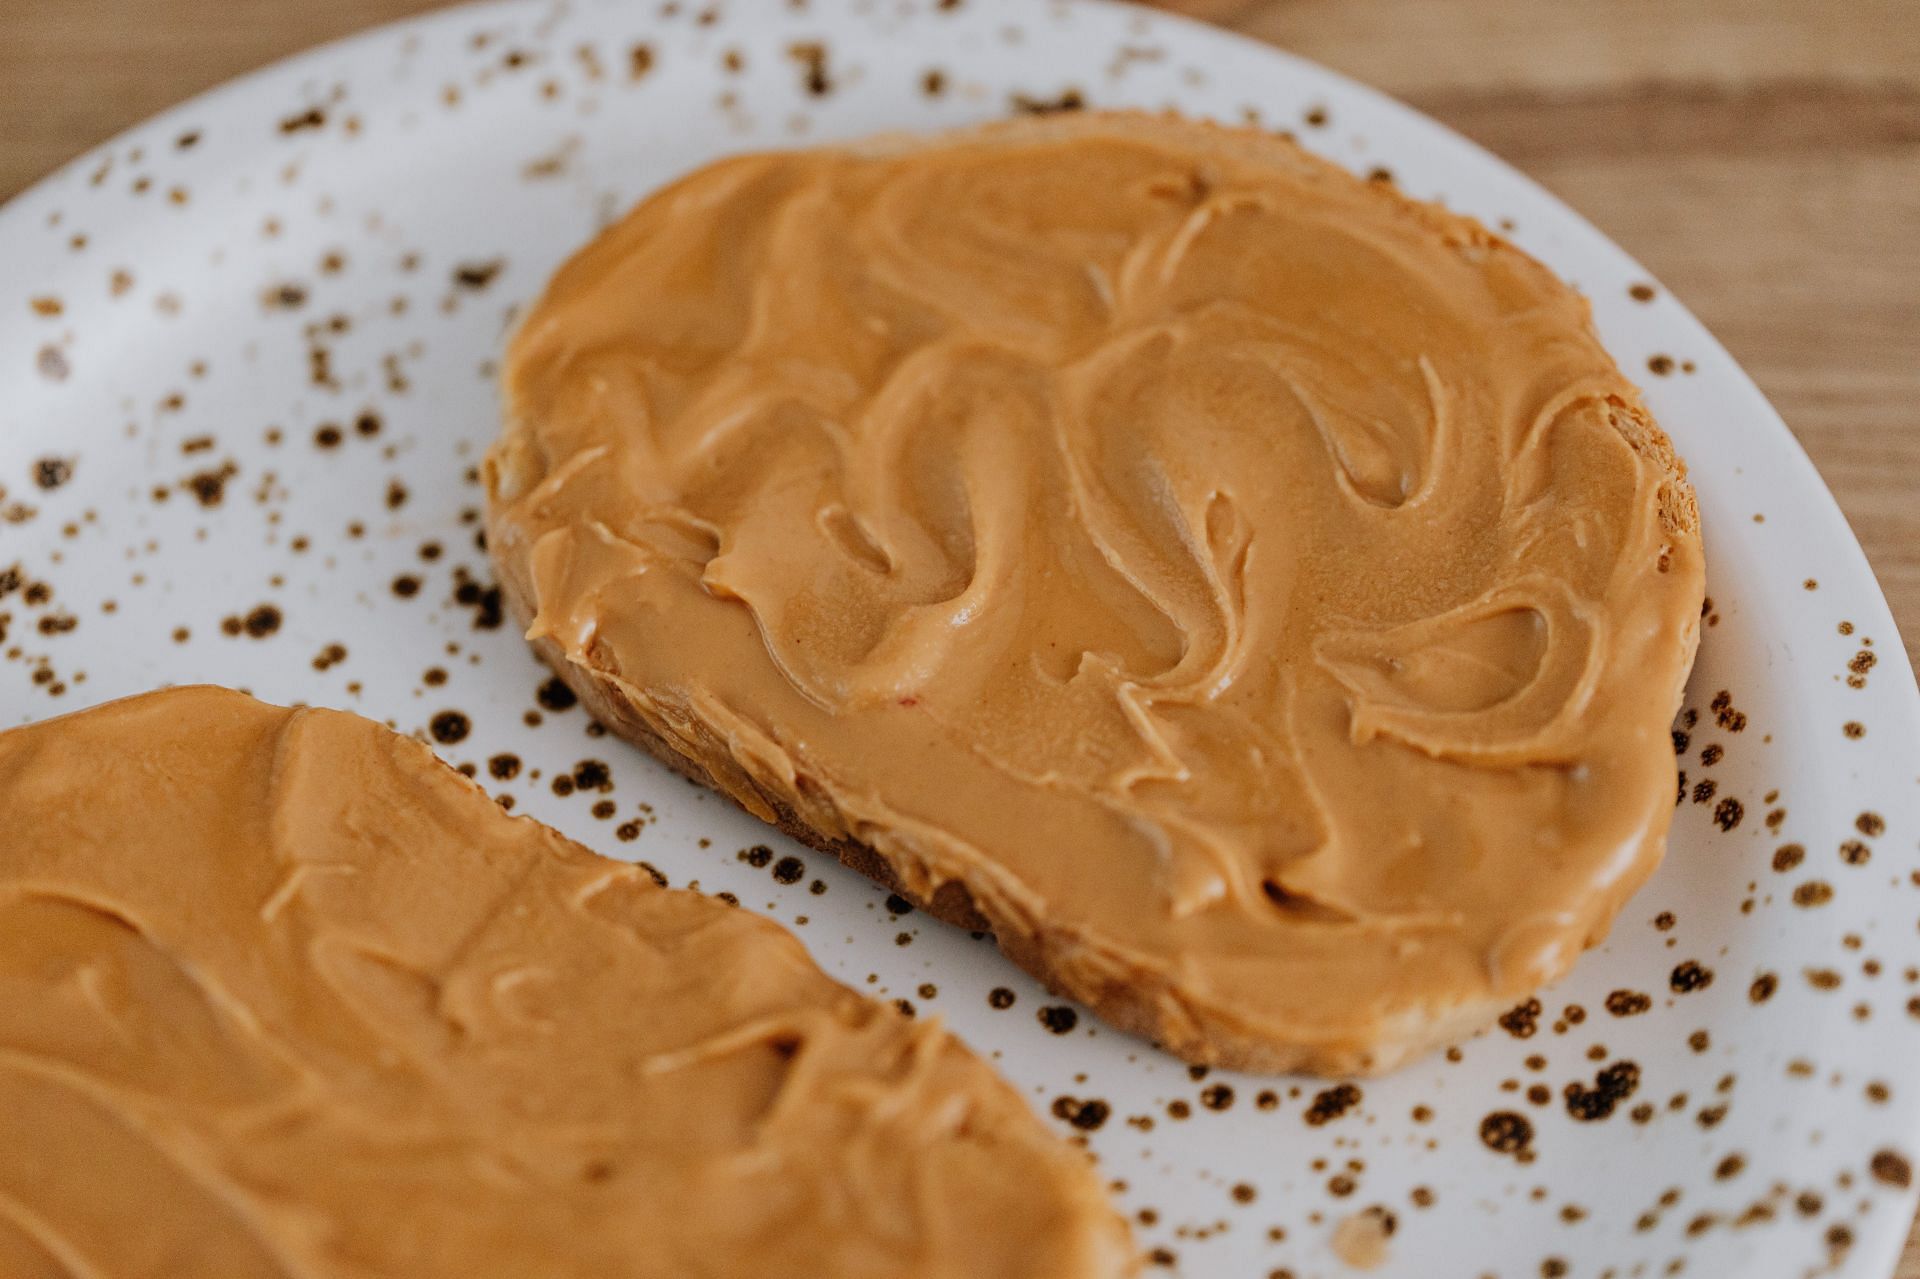 Benefits of this nut butter (Image sourced via Pexels / Photo by Karolina)